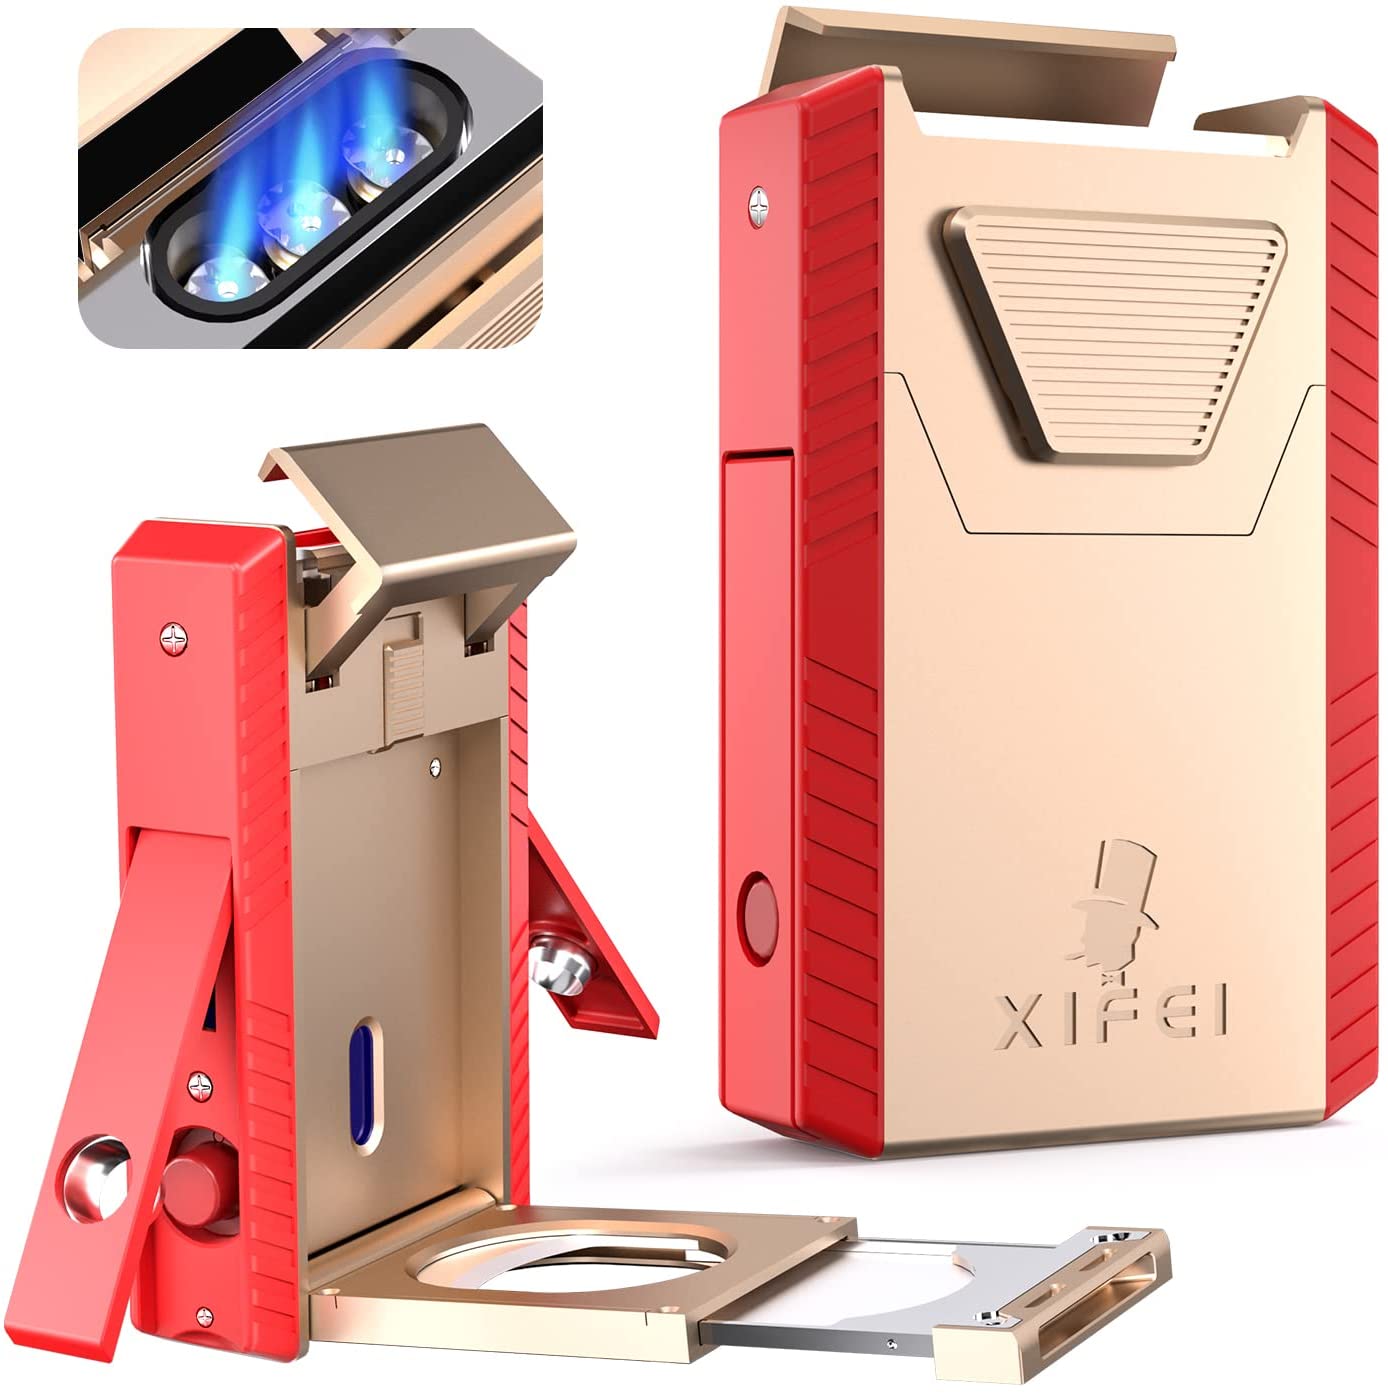  XIFEI Cigar Lighter, Triple Jet Flame Torch Lighter with Cigar  Cutter V Cut, Cigar Accessories Cigar Holder, Windproof Refillable Butane  Lighters for Smoking with Gift Box : Health & Household